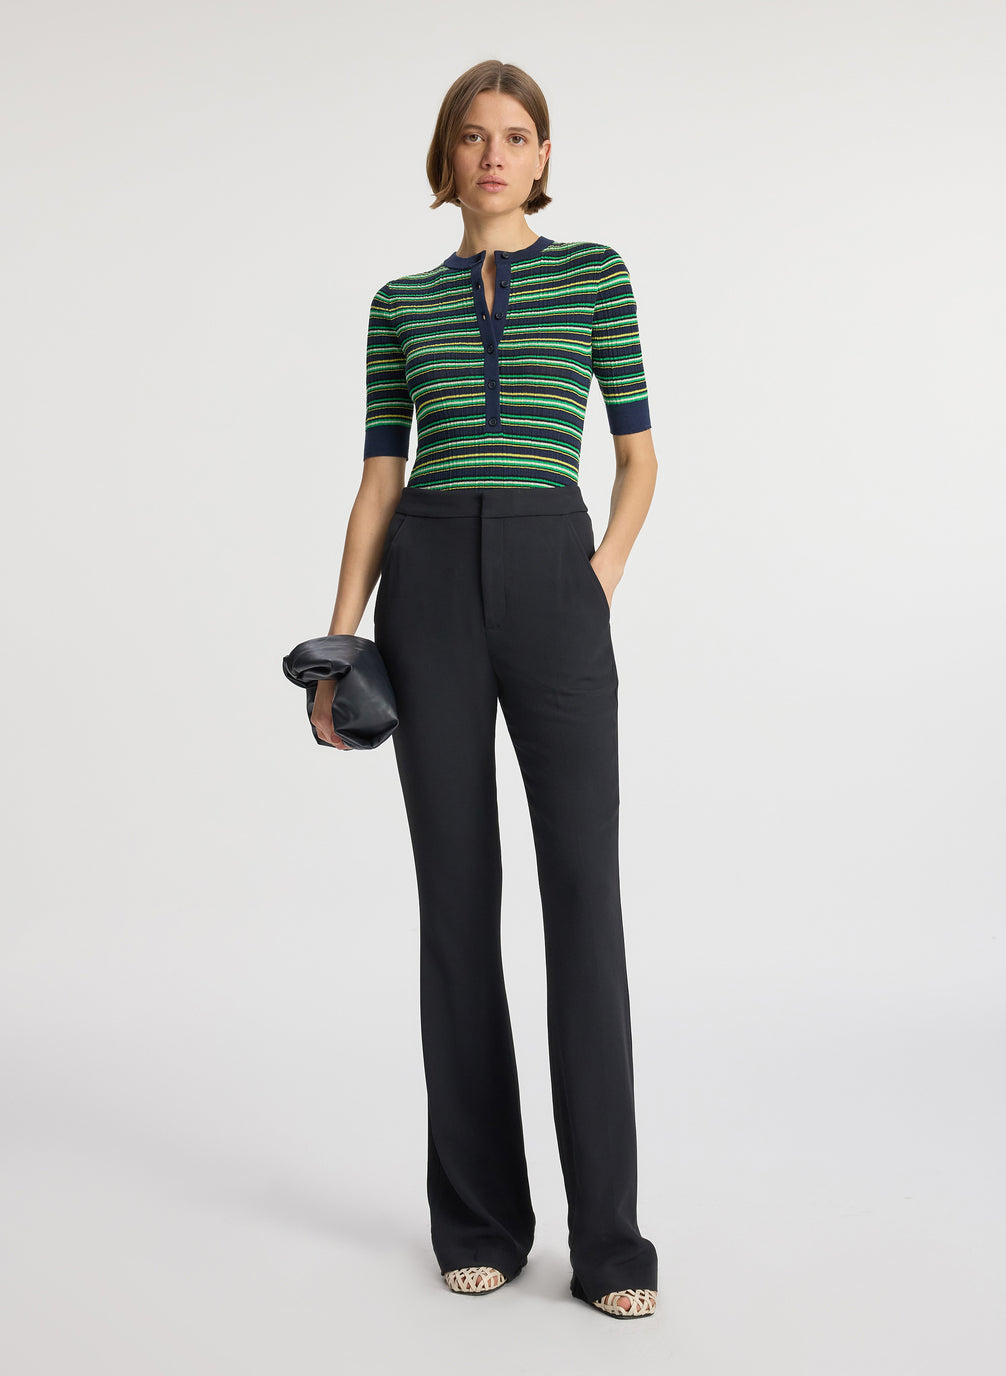 front view of woman wearing navy blue and green striped half sleeve button placket shirt and black pant